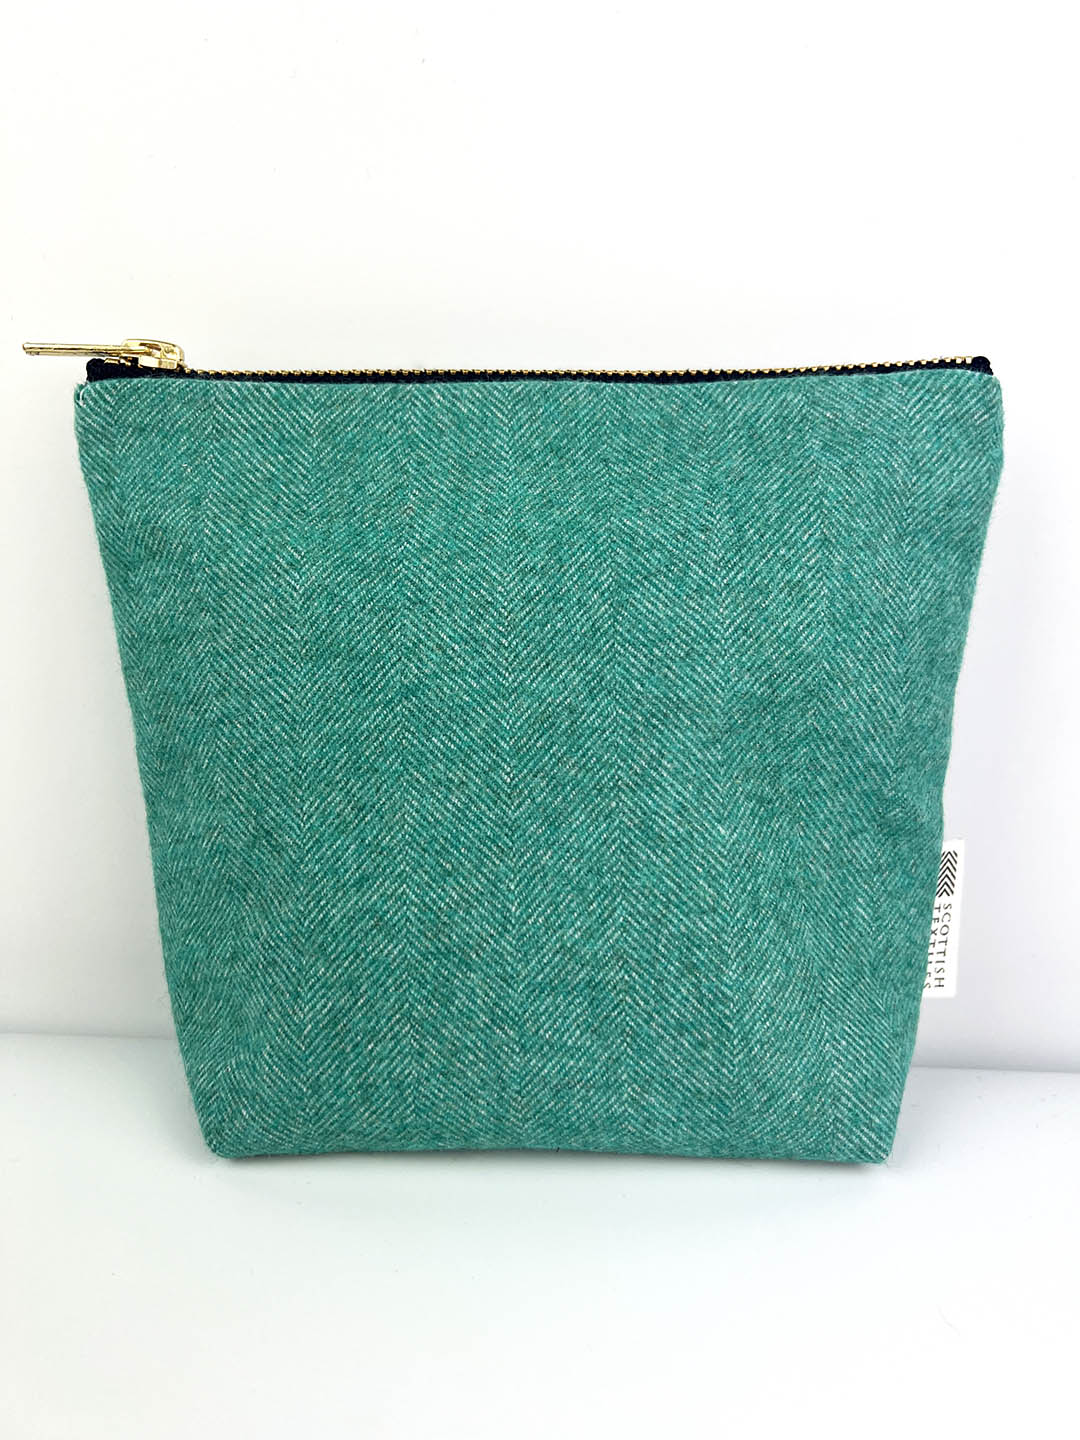 Jade coloured Tweed bag woven in Elgin, and made in Dunfermline. Scottish textiles showcase